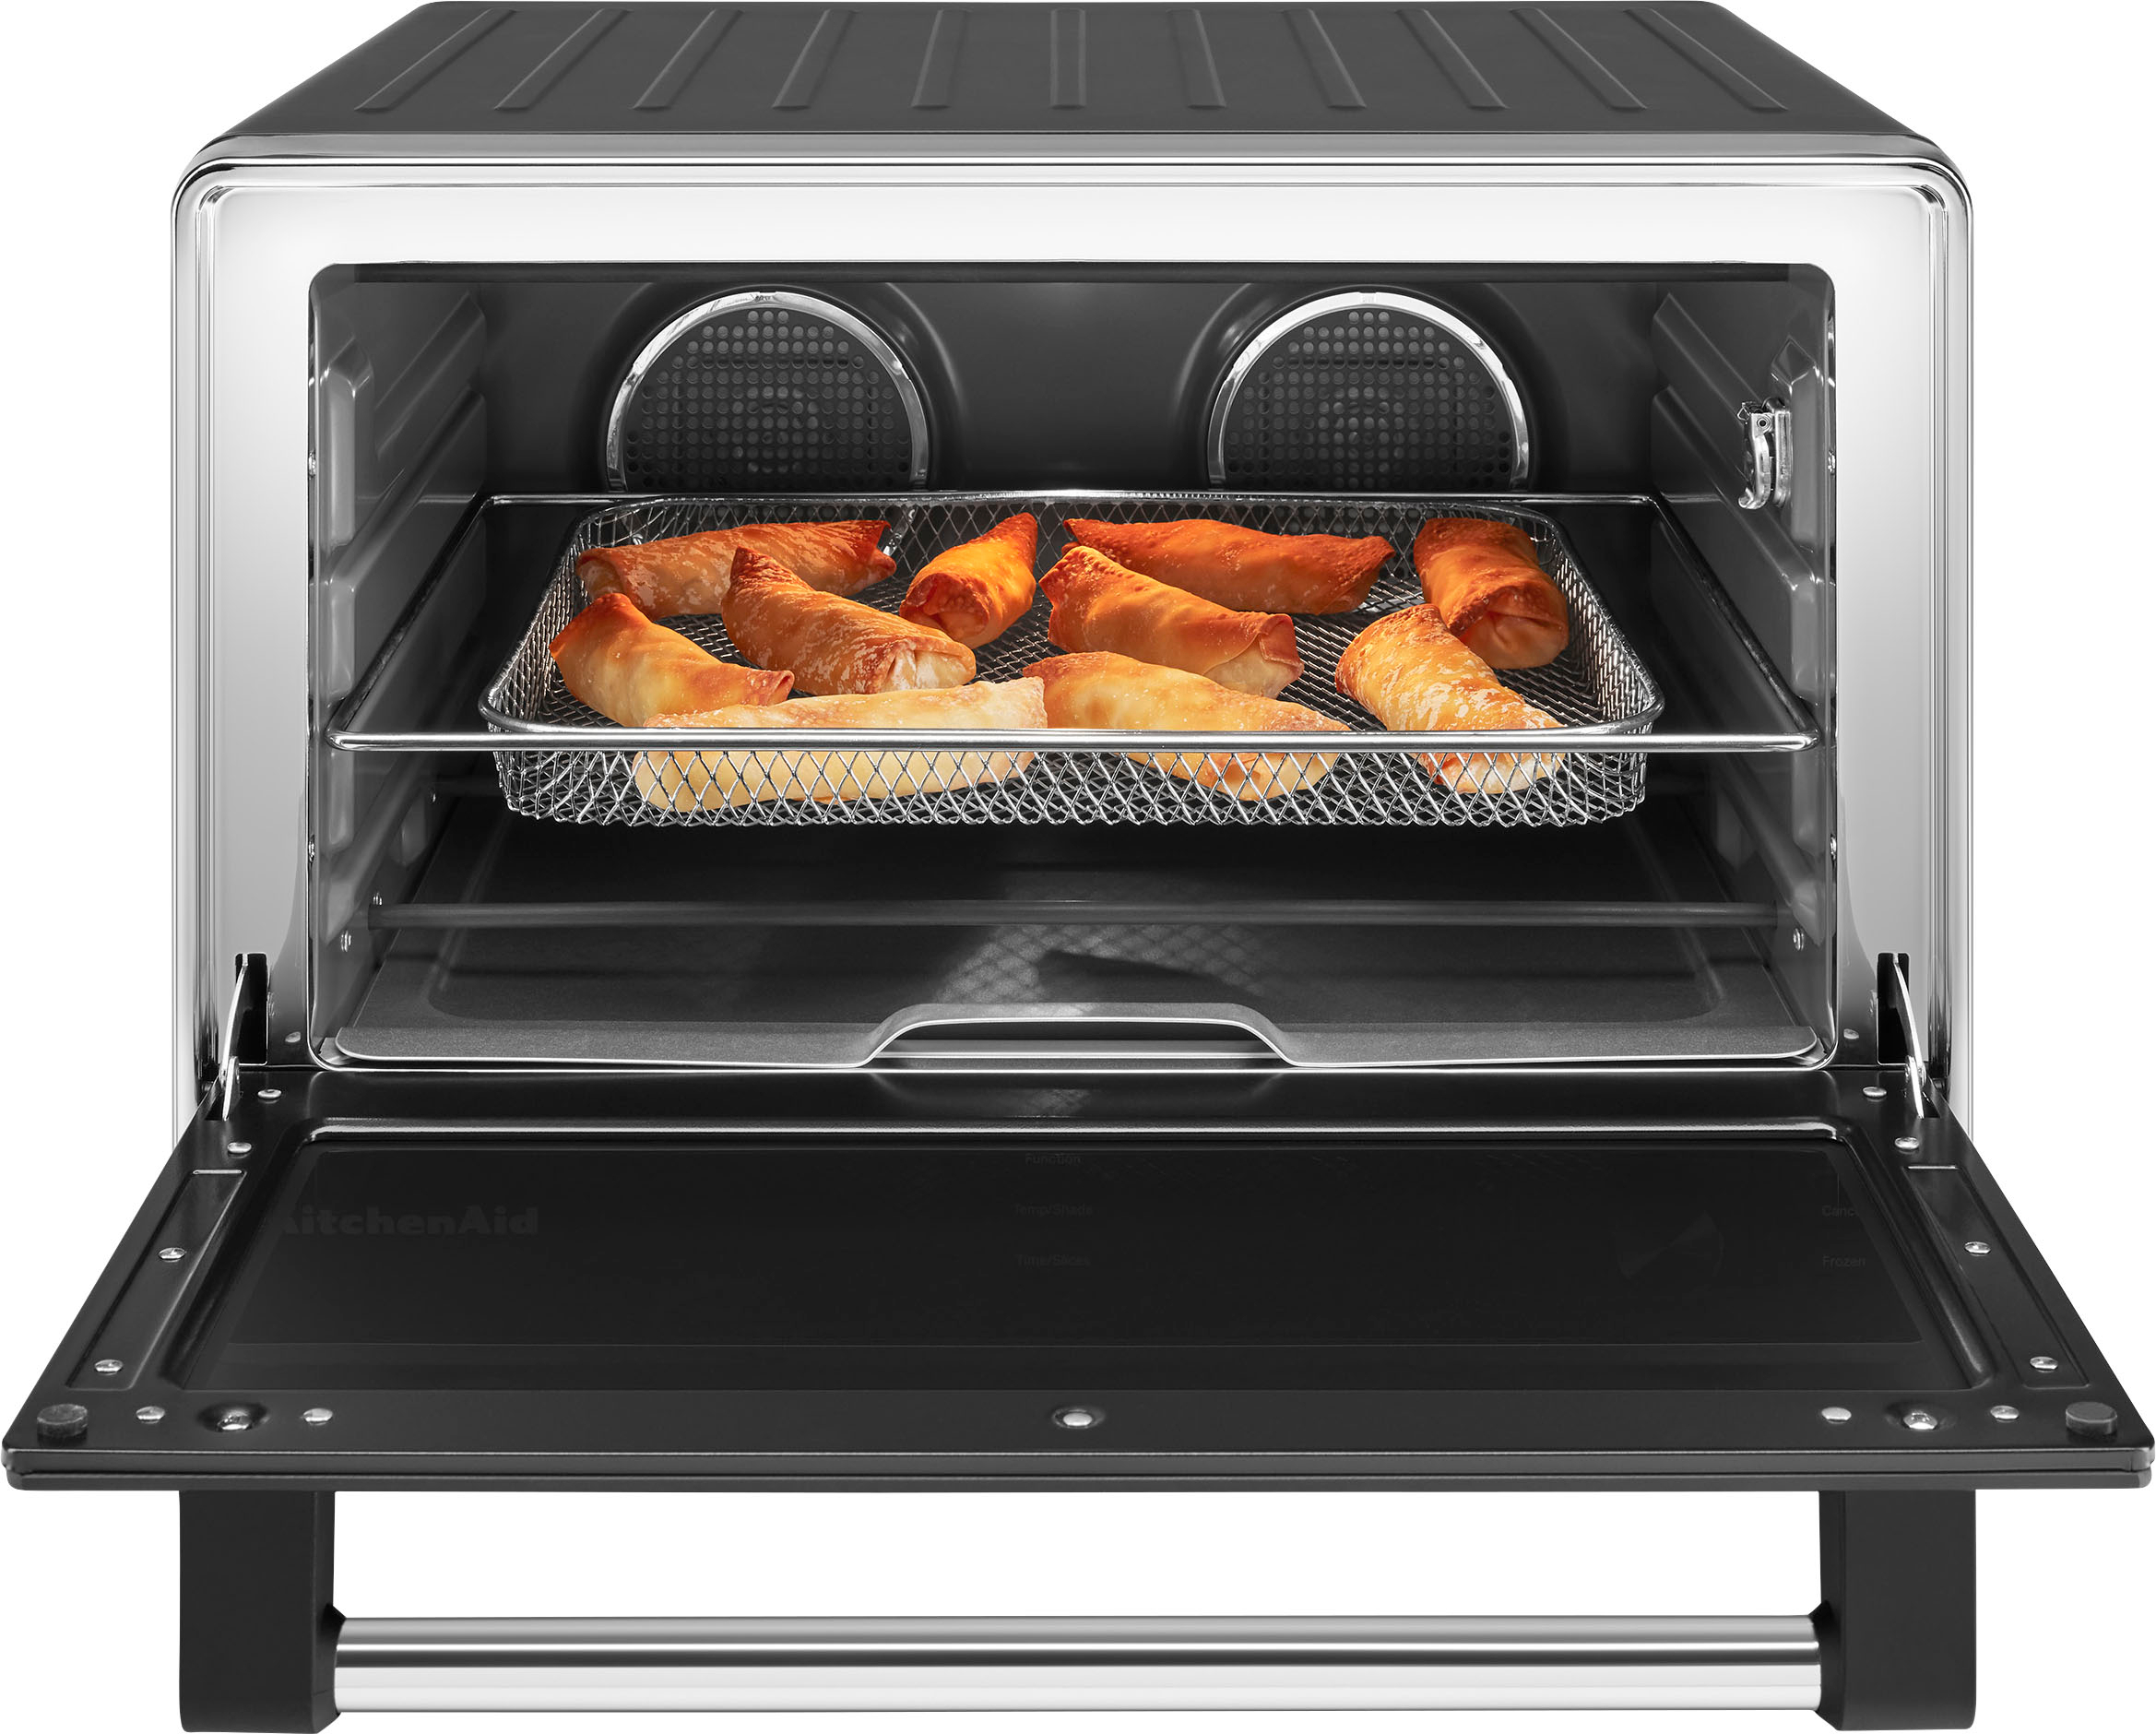 KitchenAid Digital Countertop Oven with Air Fry Review